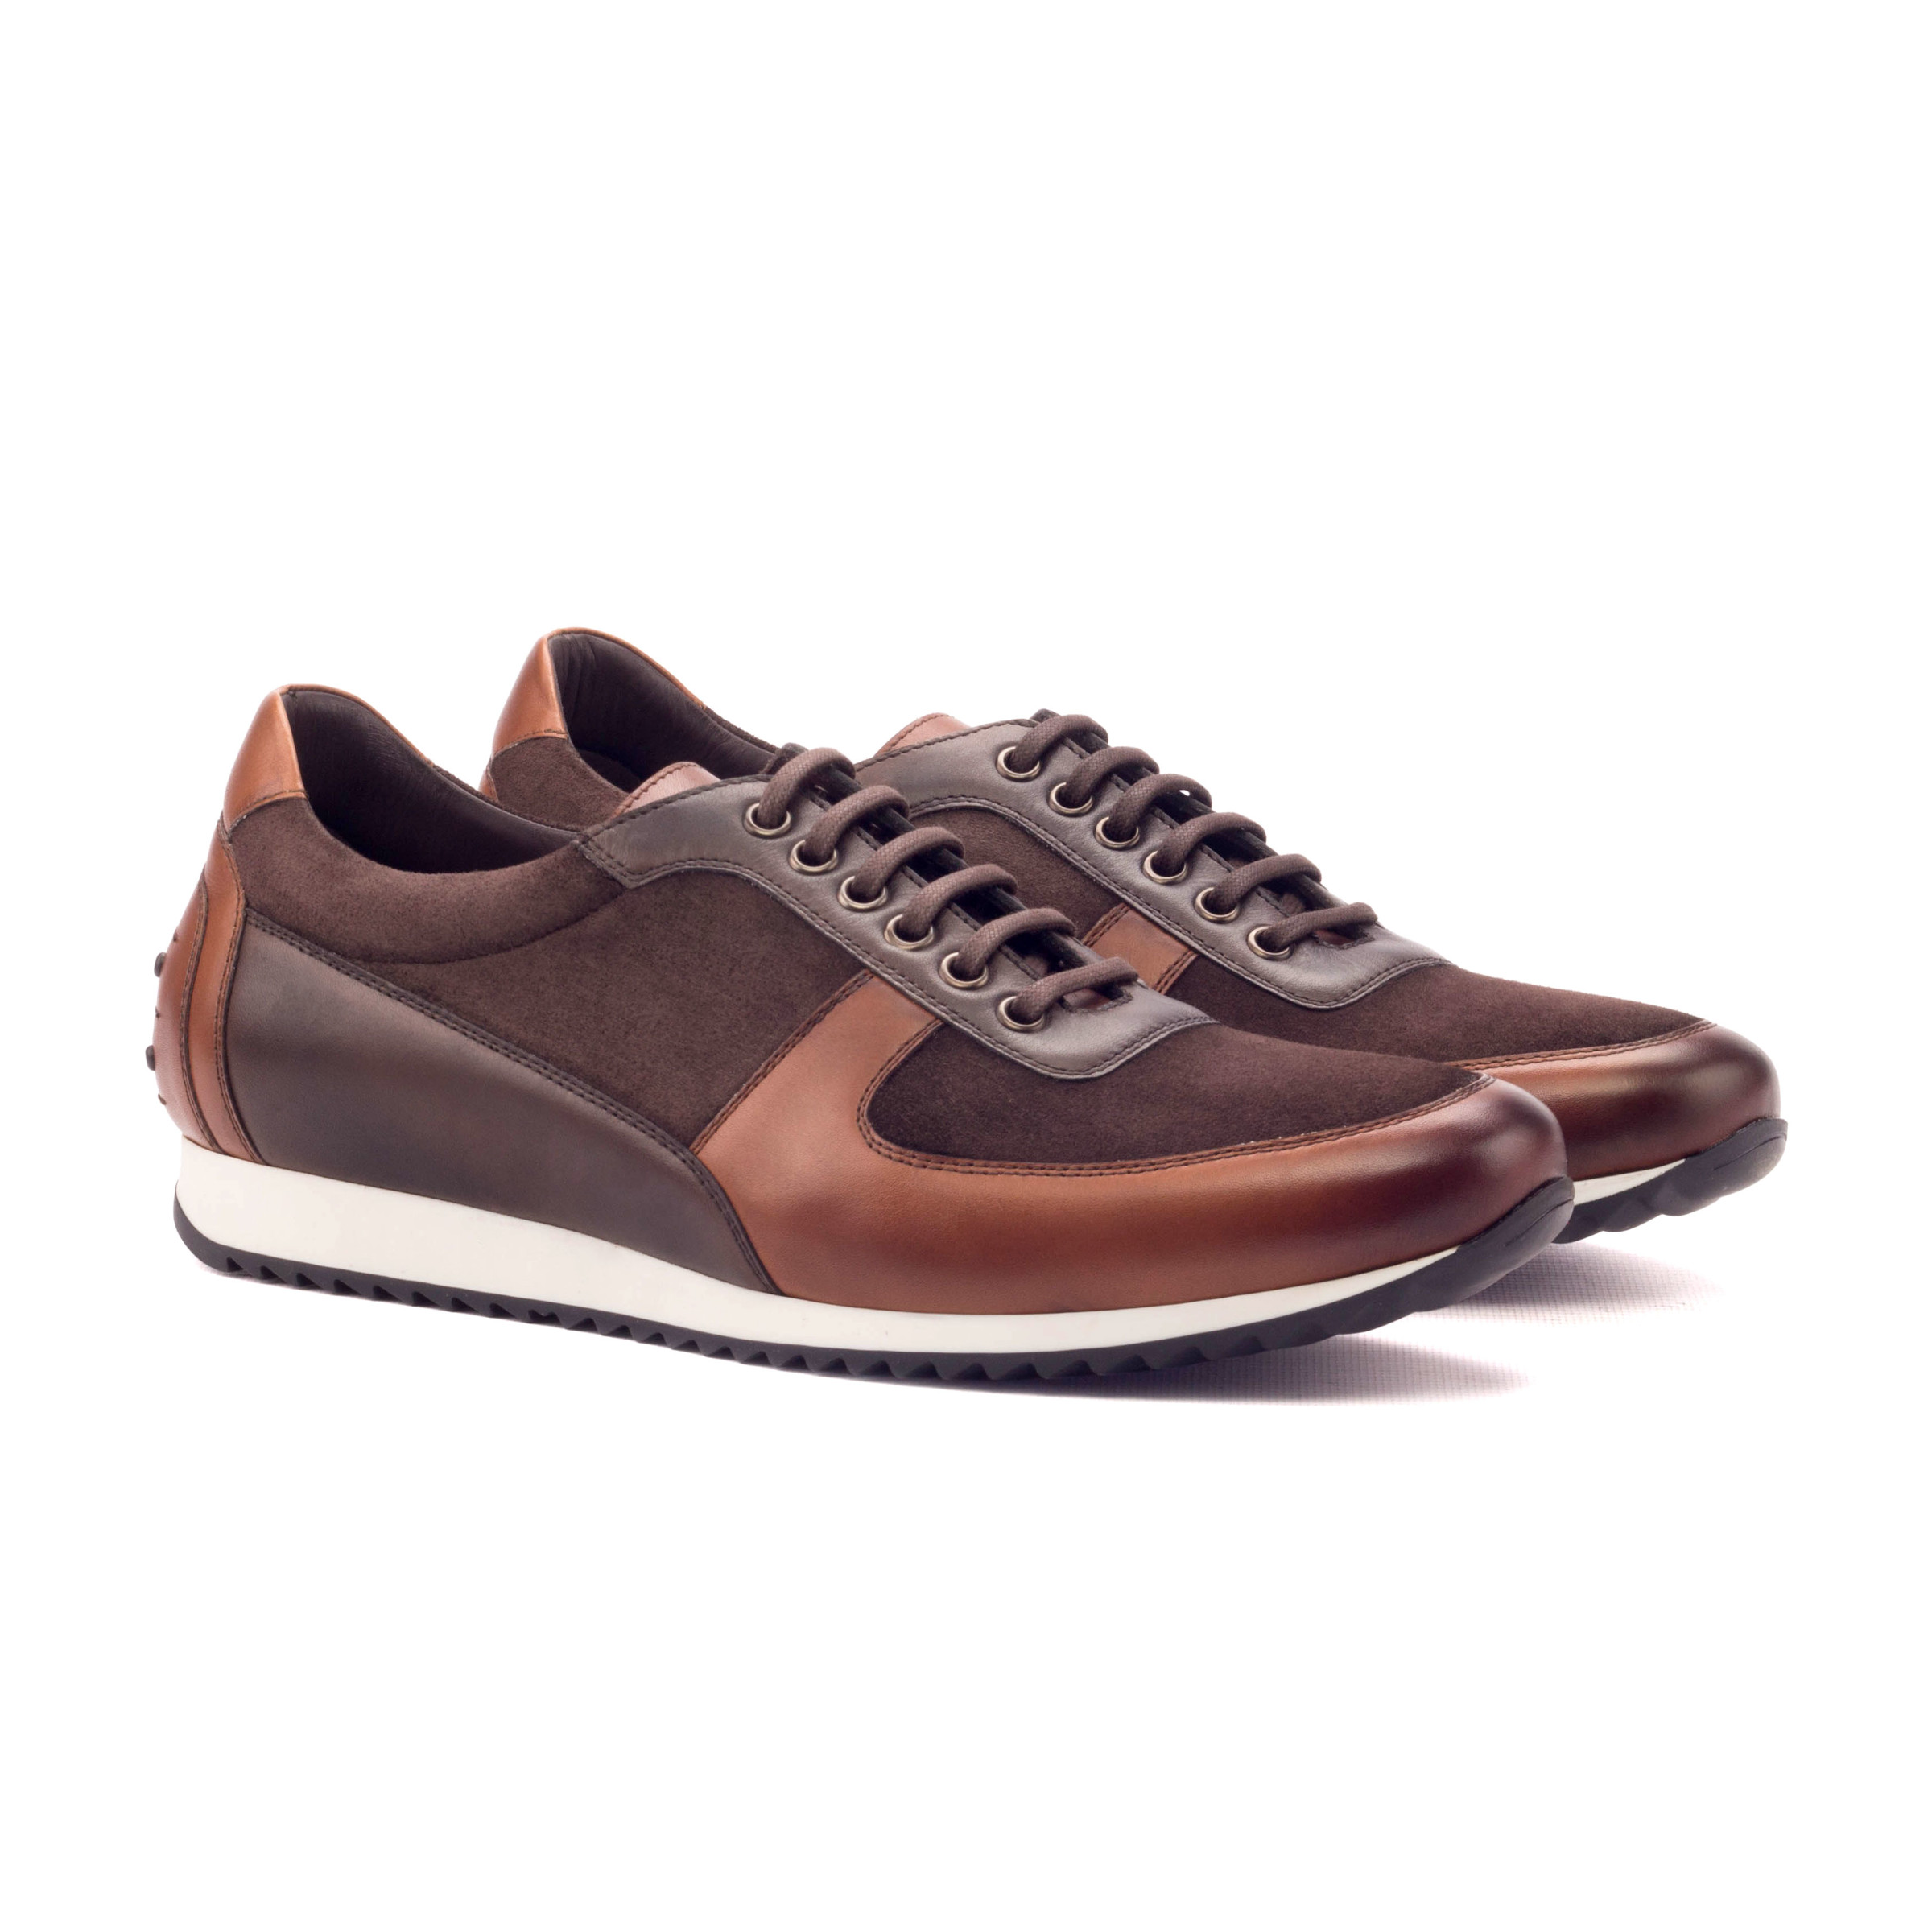 Corsini Sneaker in Brown Leather and Suede